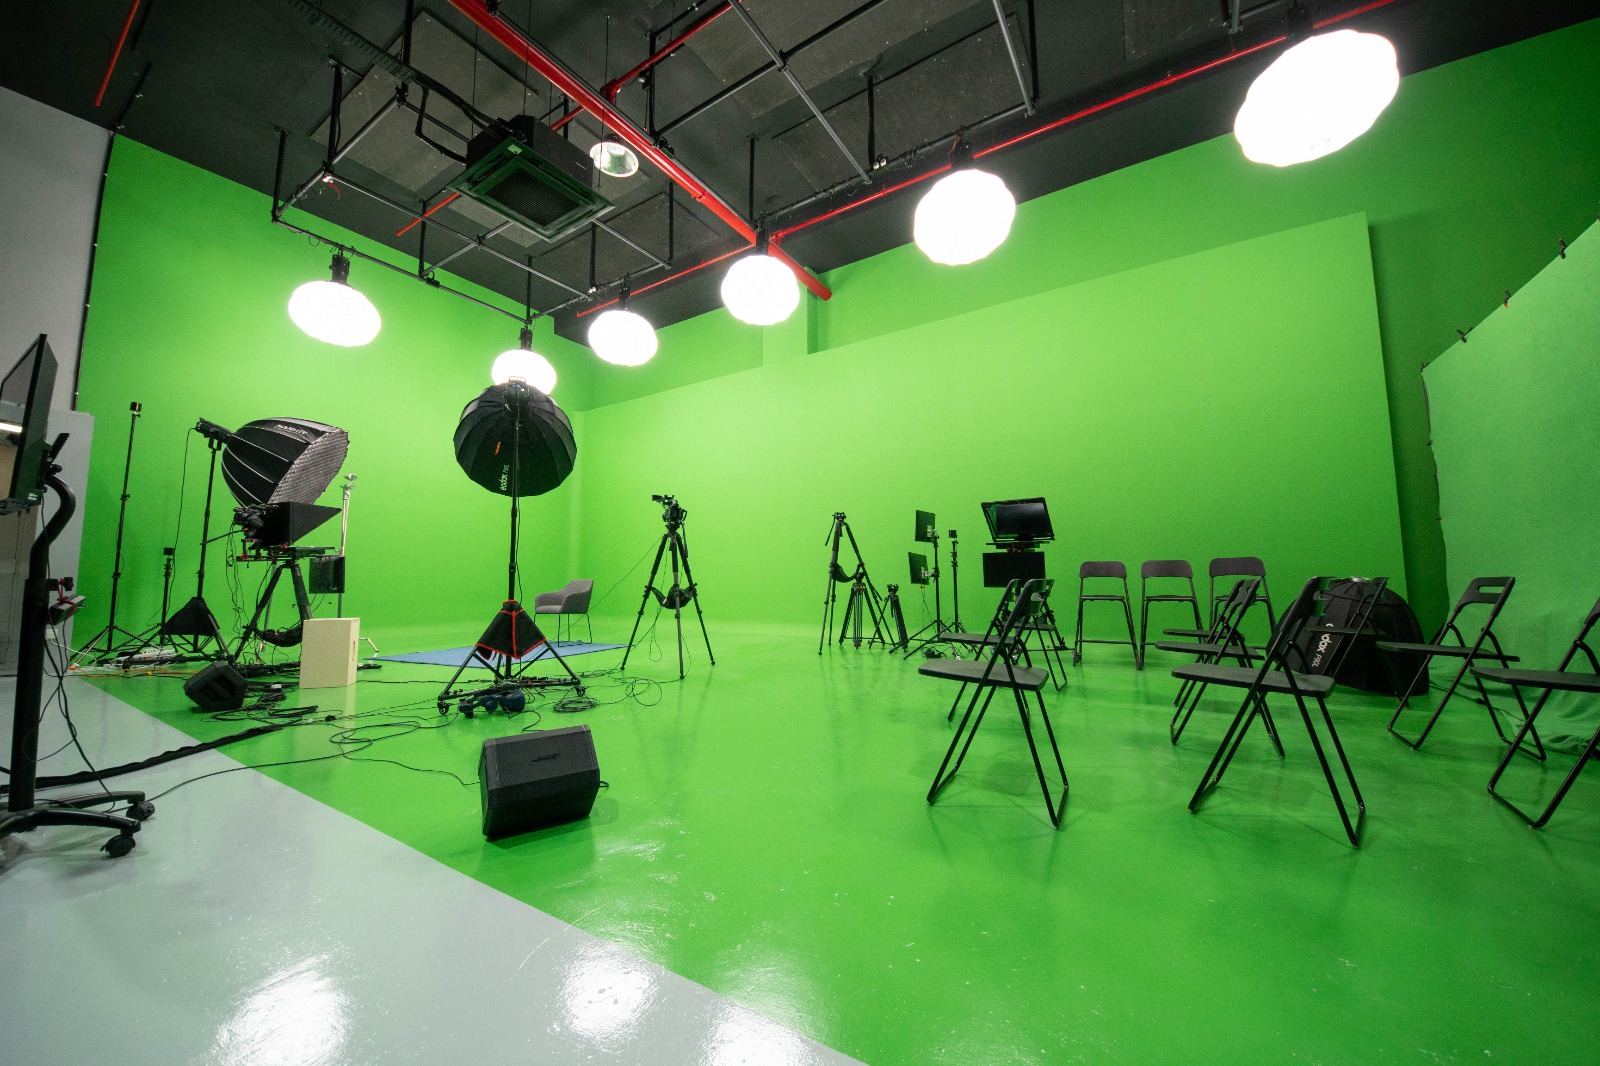 green screen for streaming